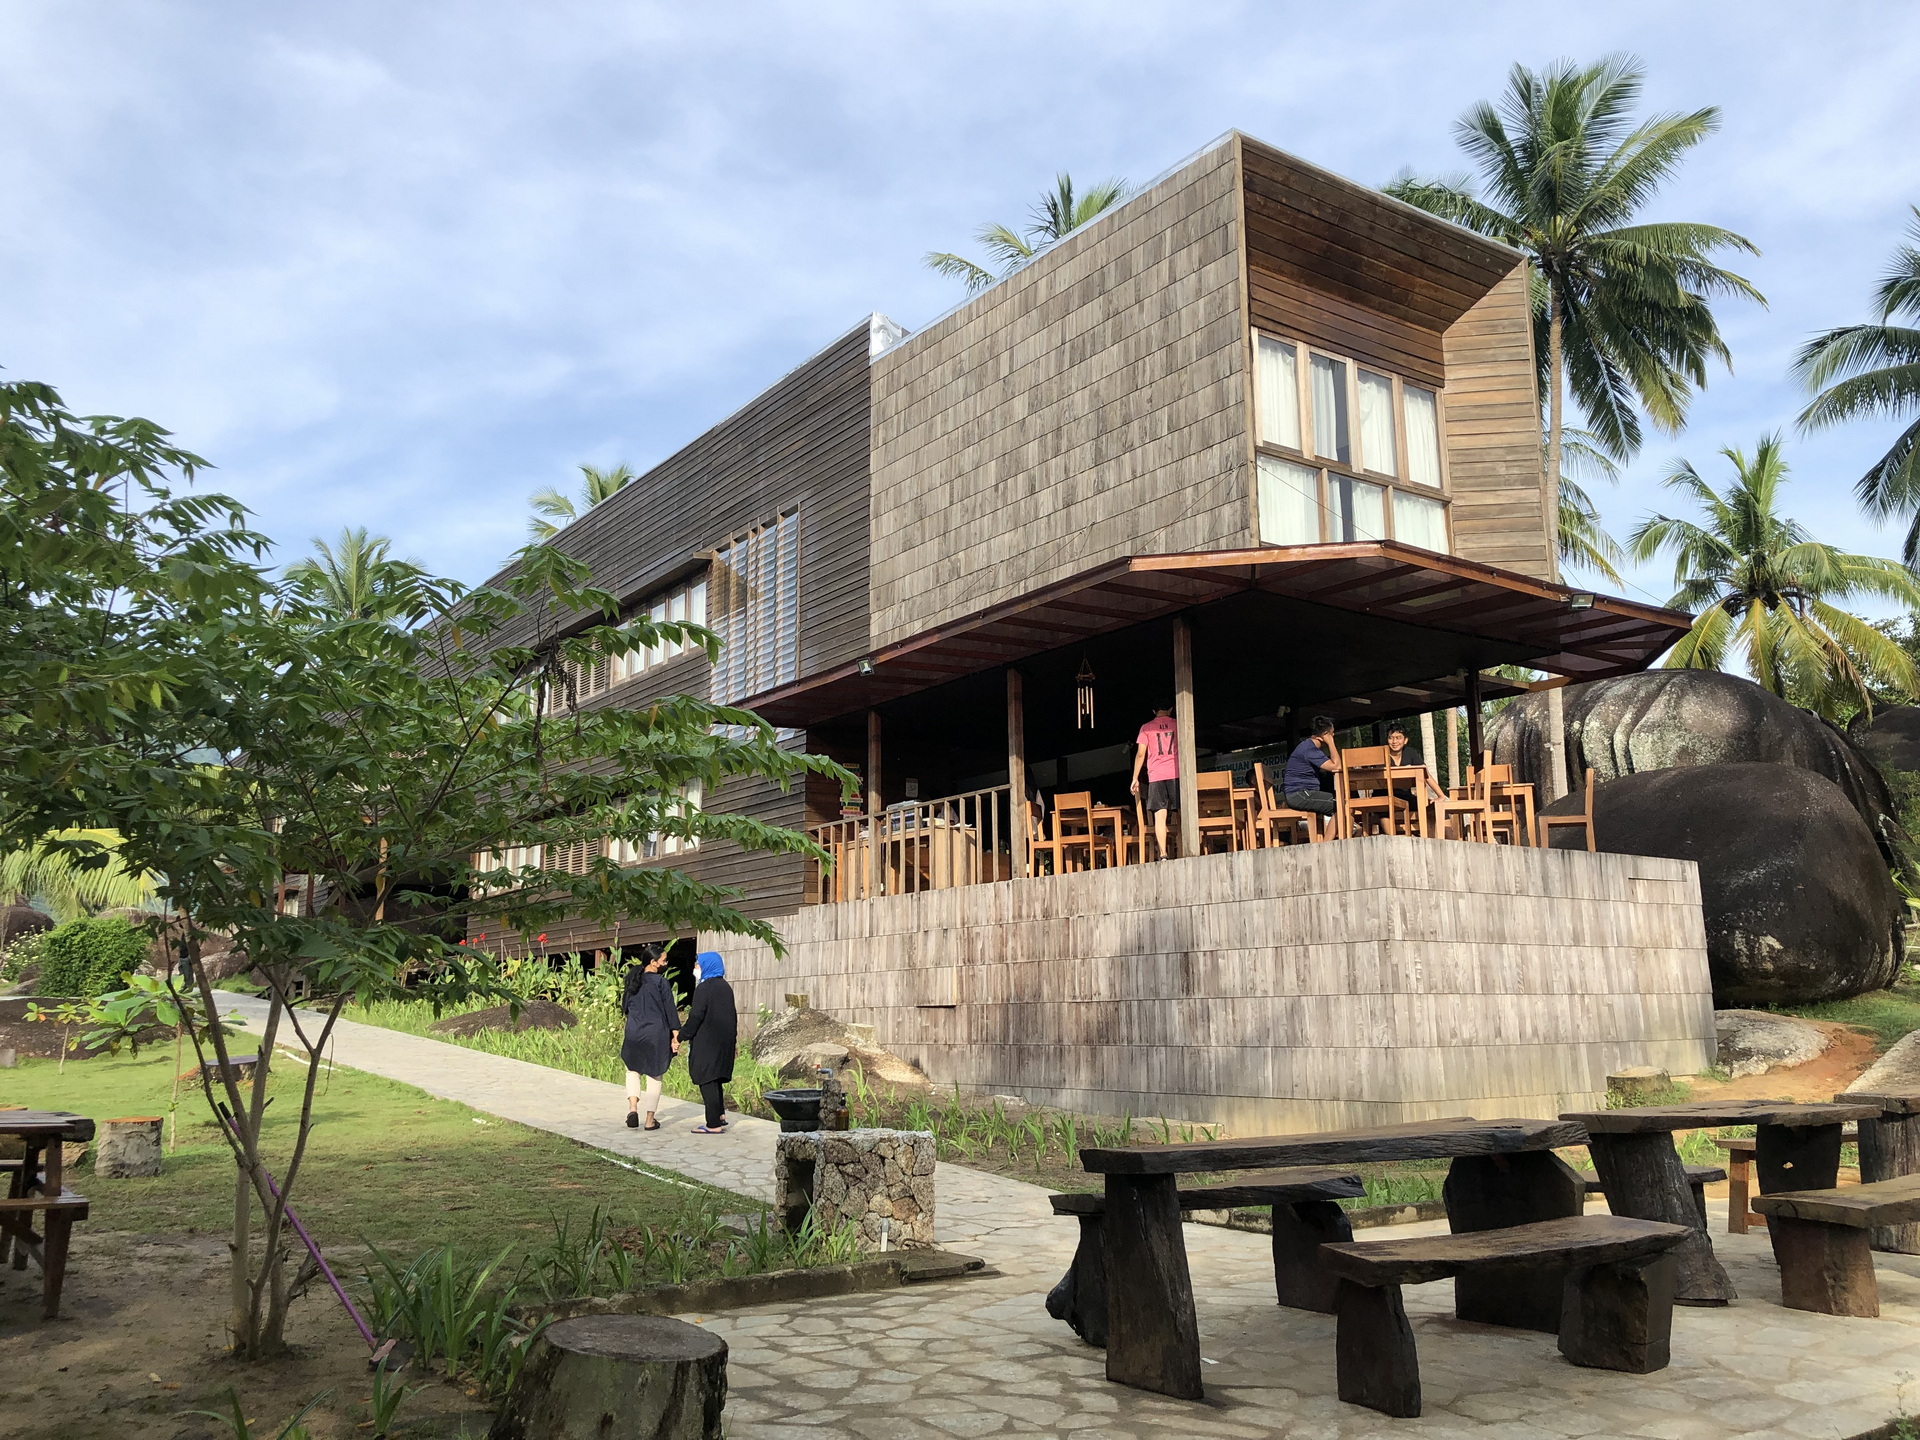 <p>On a small, outer island, the main two-storey hotel contains 13 guest rooms on the upper floor, with a reception area and breakfast room on the ground floor.&nbsp;</p>